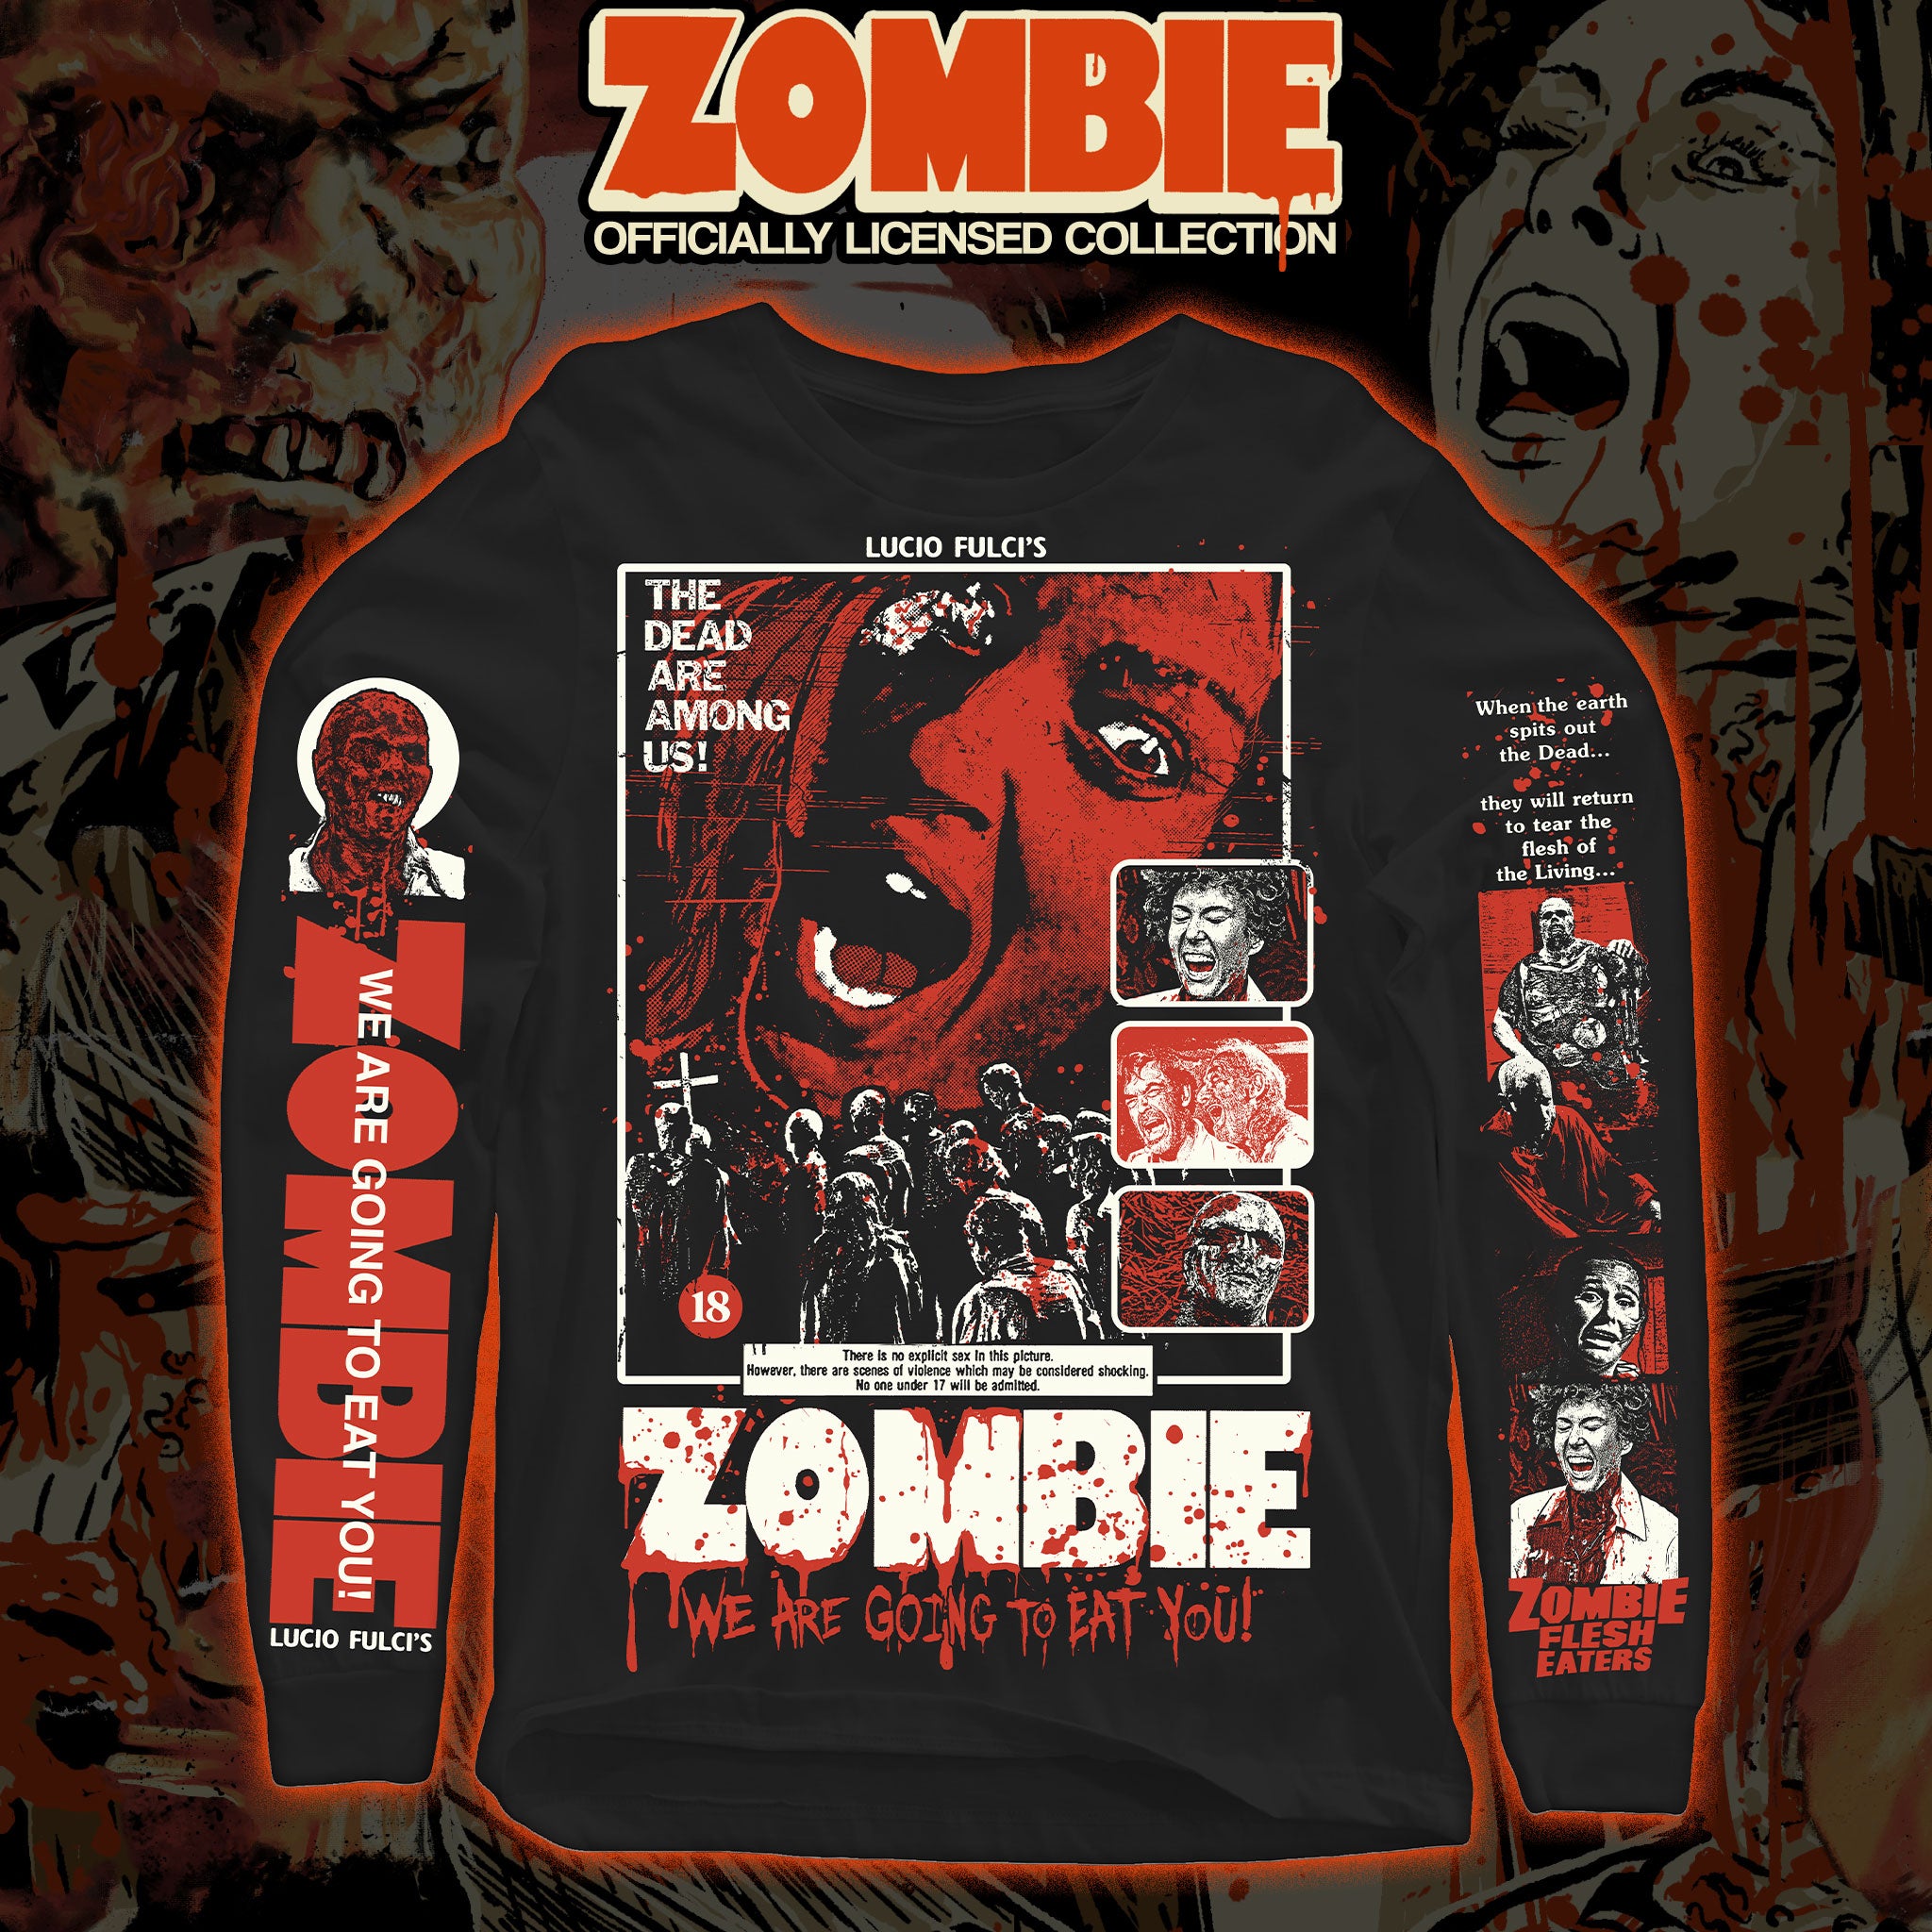 ZOMBIE "We Are Going to Eat You" Long sleeve